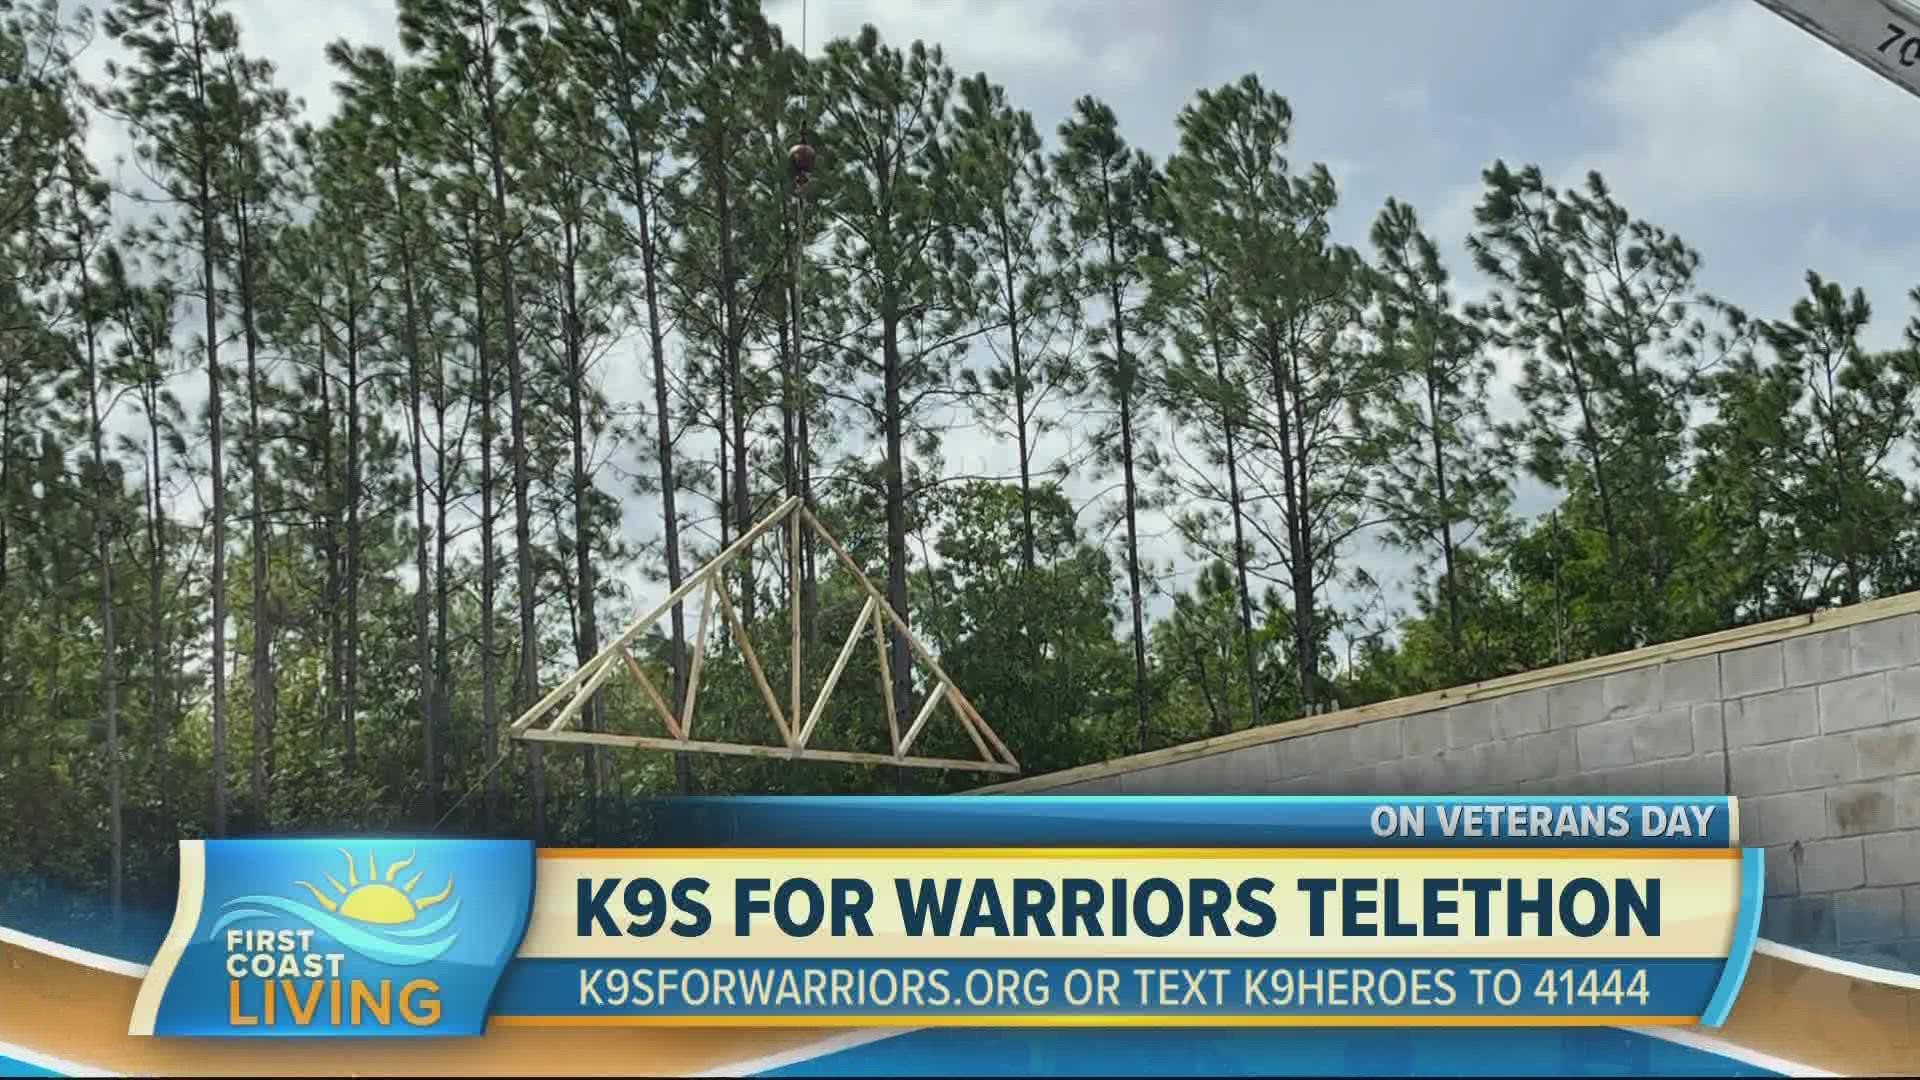 CEO of K9s for Warriors Rory Diamond talks about the big goal to help more Veterans by raising enough money for the World's largest kennel training facility!